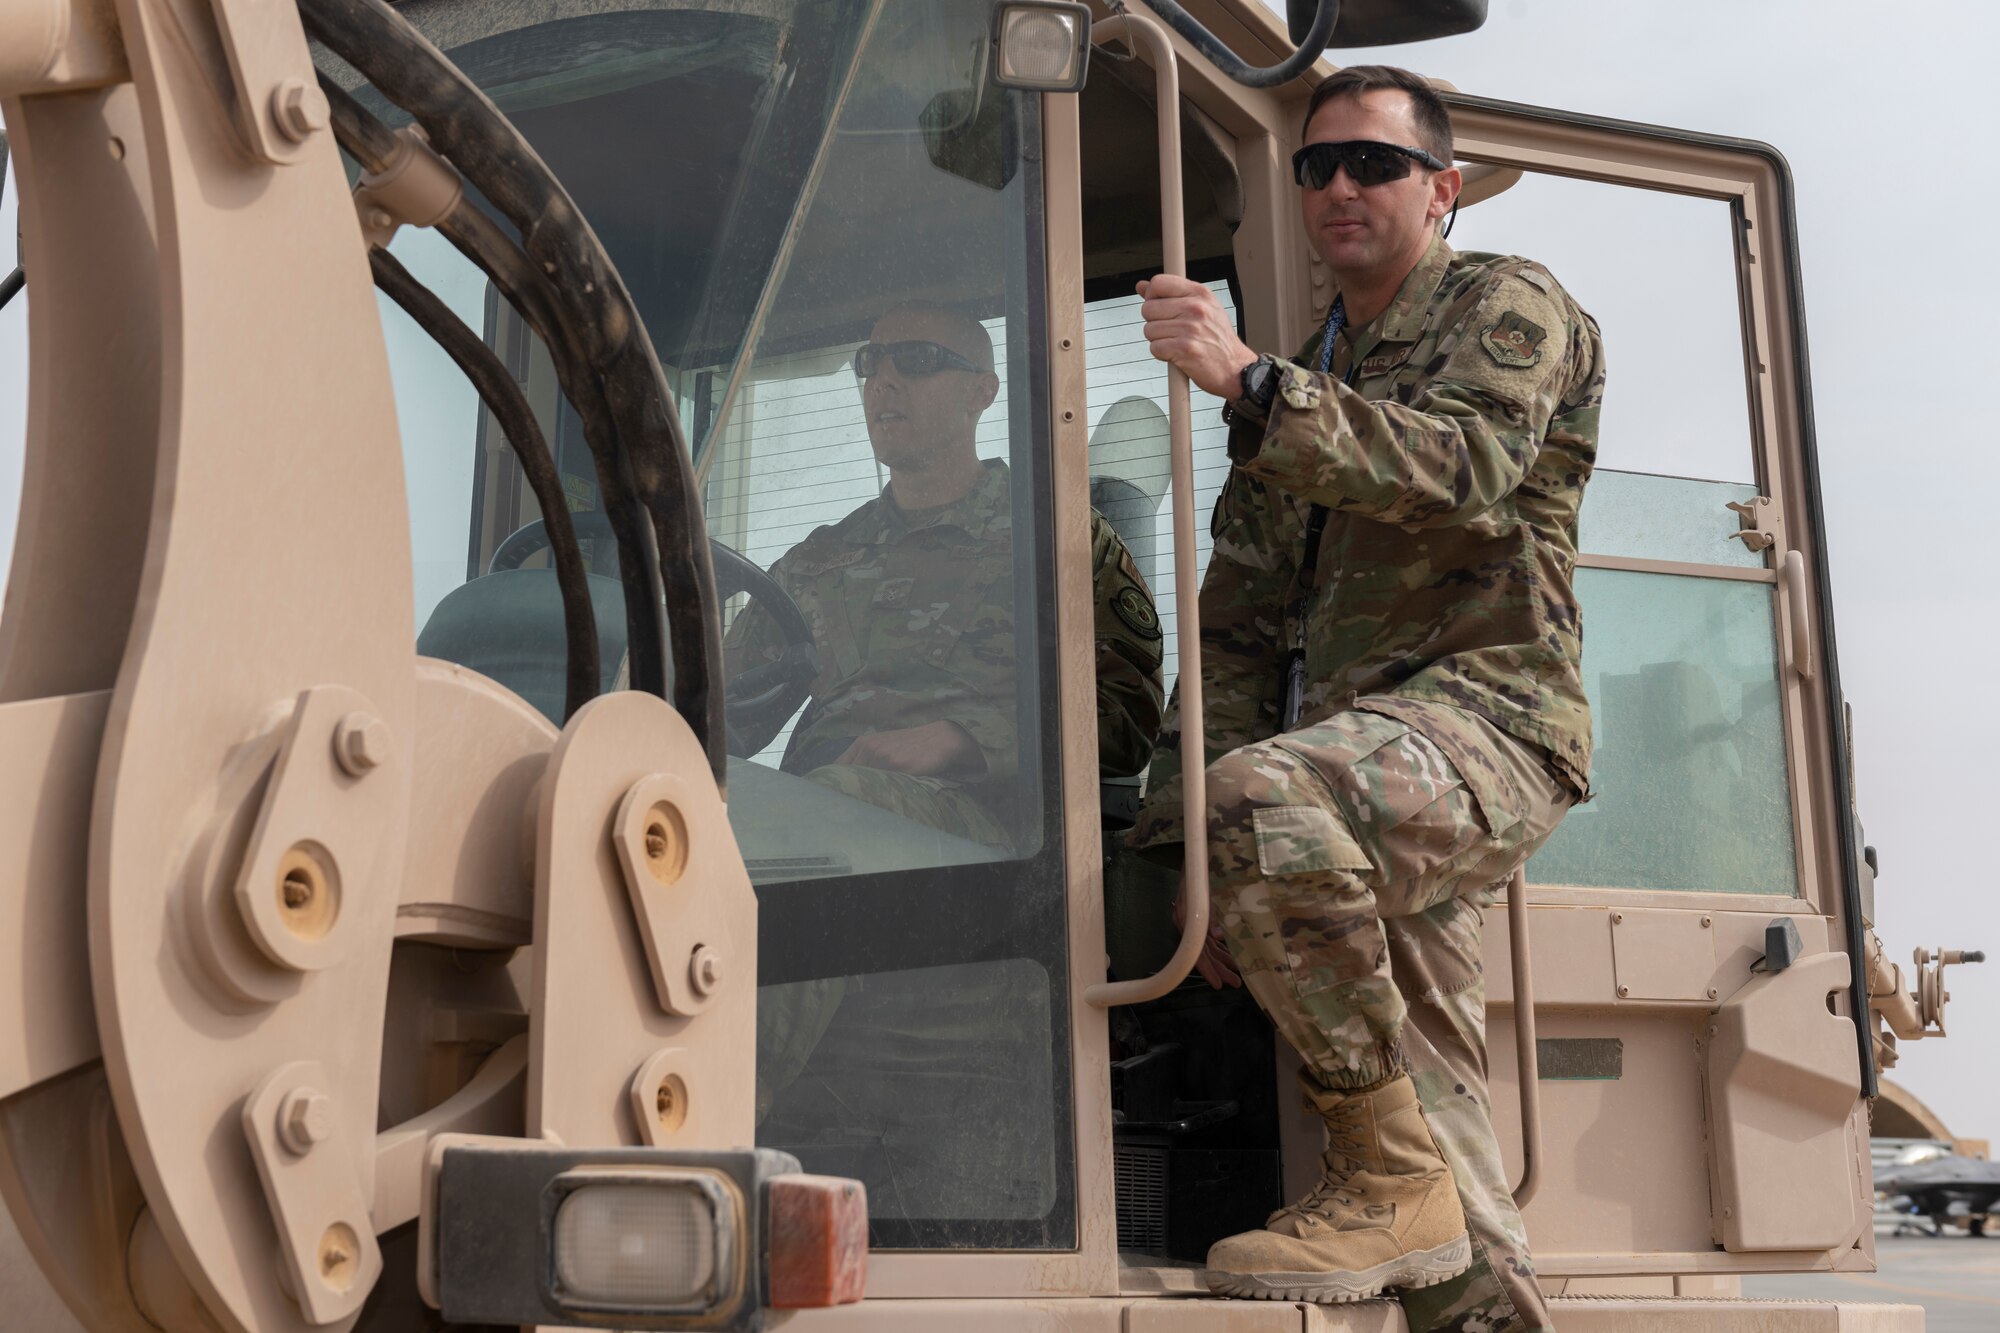 U.S. Air Force Chief Master Sgt. Sean Milligan, left, 332nd Air Expeditionary Wing command chief, operates a forklift while Master Sgt. Nathaniel Gladney, 55th Expeditionary Fighter Generation Squadron support section chief, guides him Nov. 13, 2021, at an undisclosed location somewhere in Southwest Asia. The 55th EFGS store and inspect equipment for five maintenance sections responsible for maintaining F-16C Fighting Falcons. (U.S. Air Force photo by Senior Airman Cameron Otte)